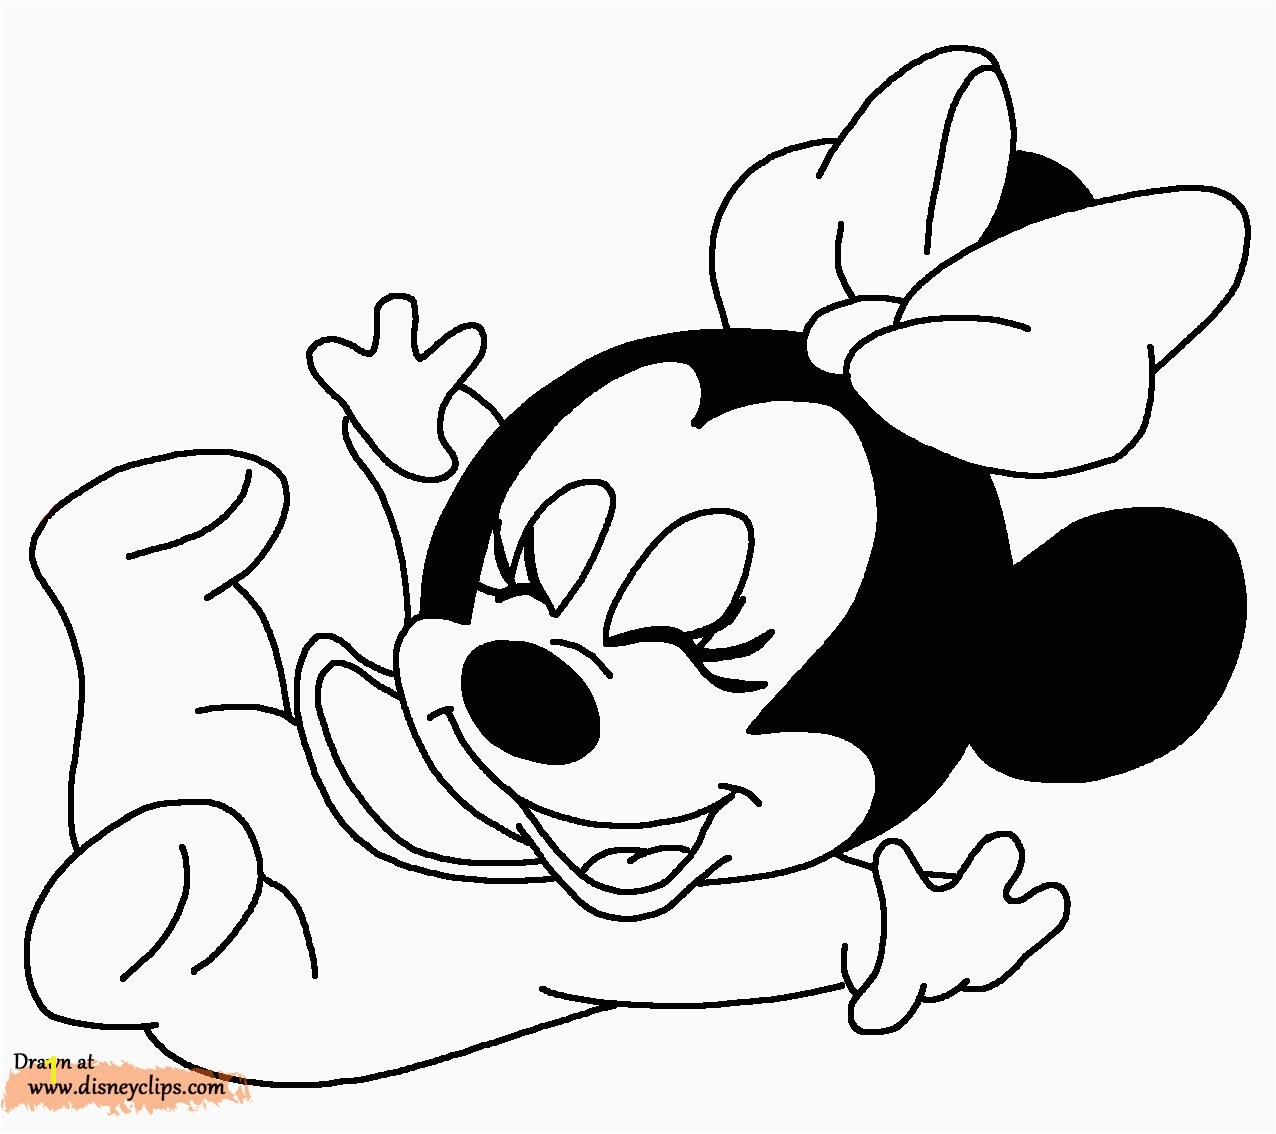 Bitty Baby Coloring Pages Free Coloring Pages for Girls Disney New Baby Coloring Pages